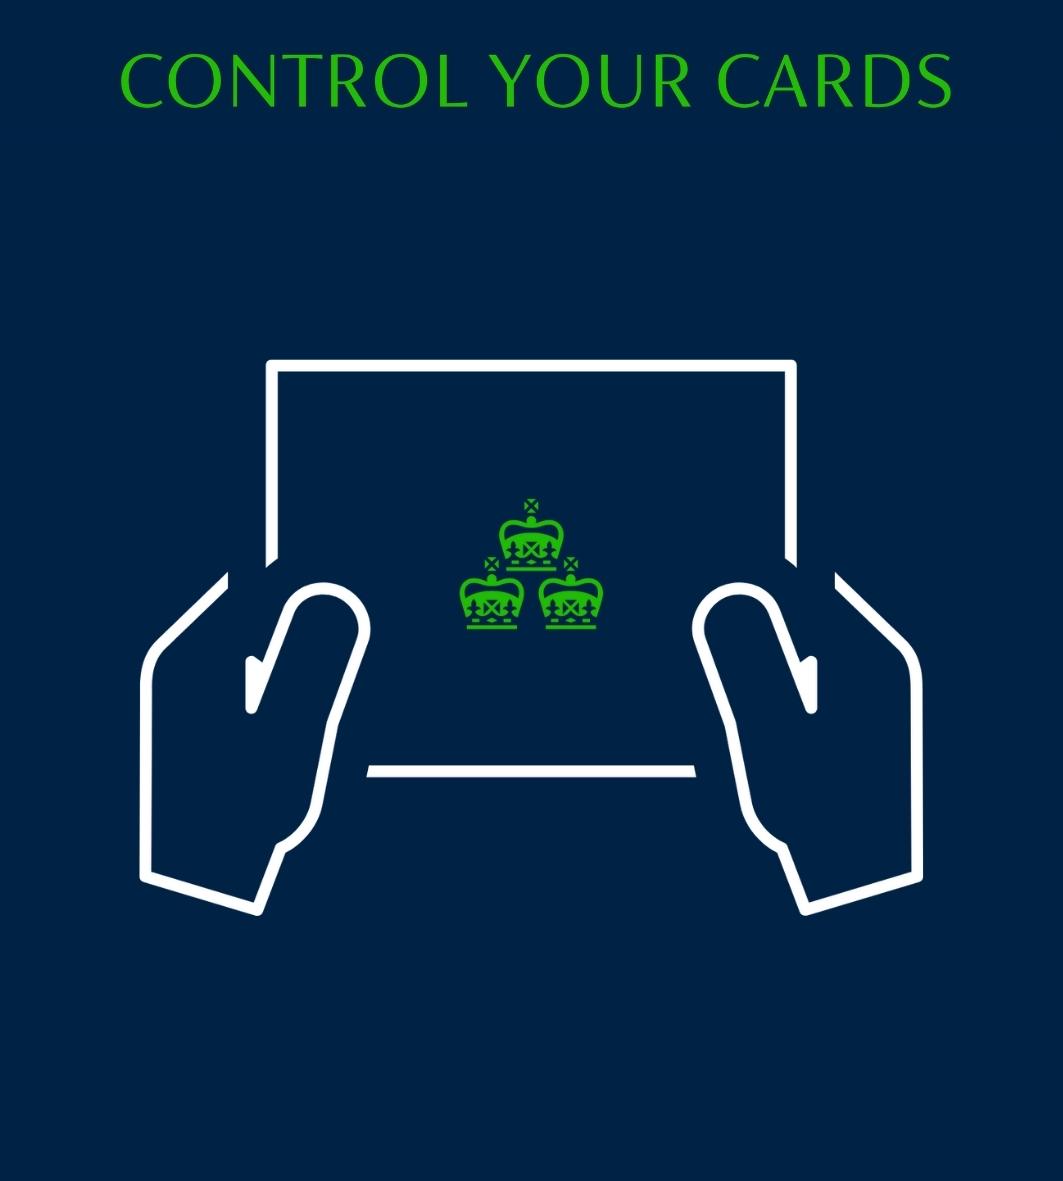 Control Your Cards